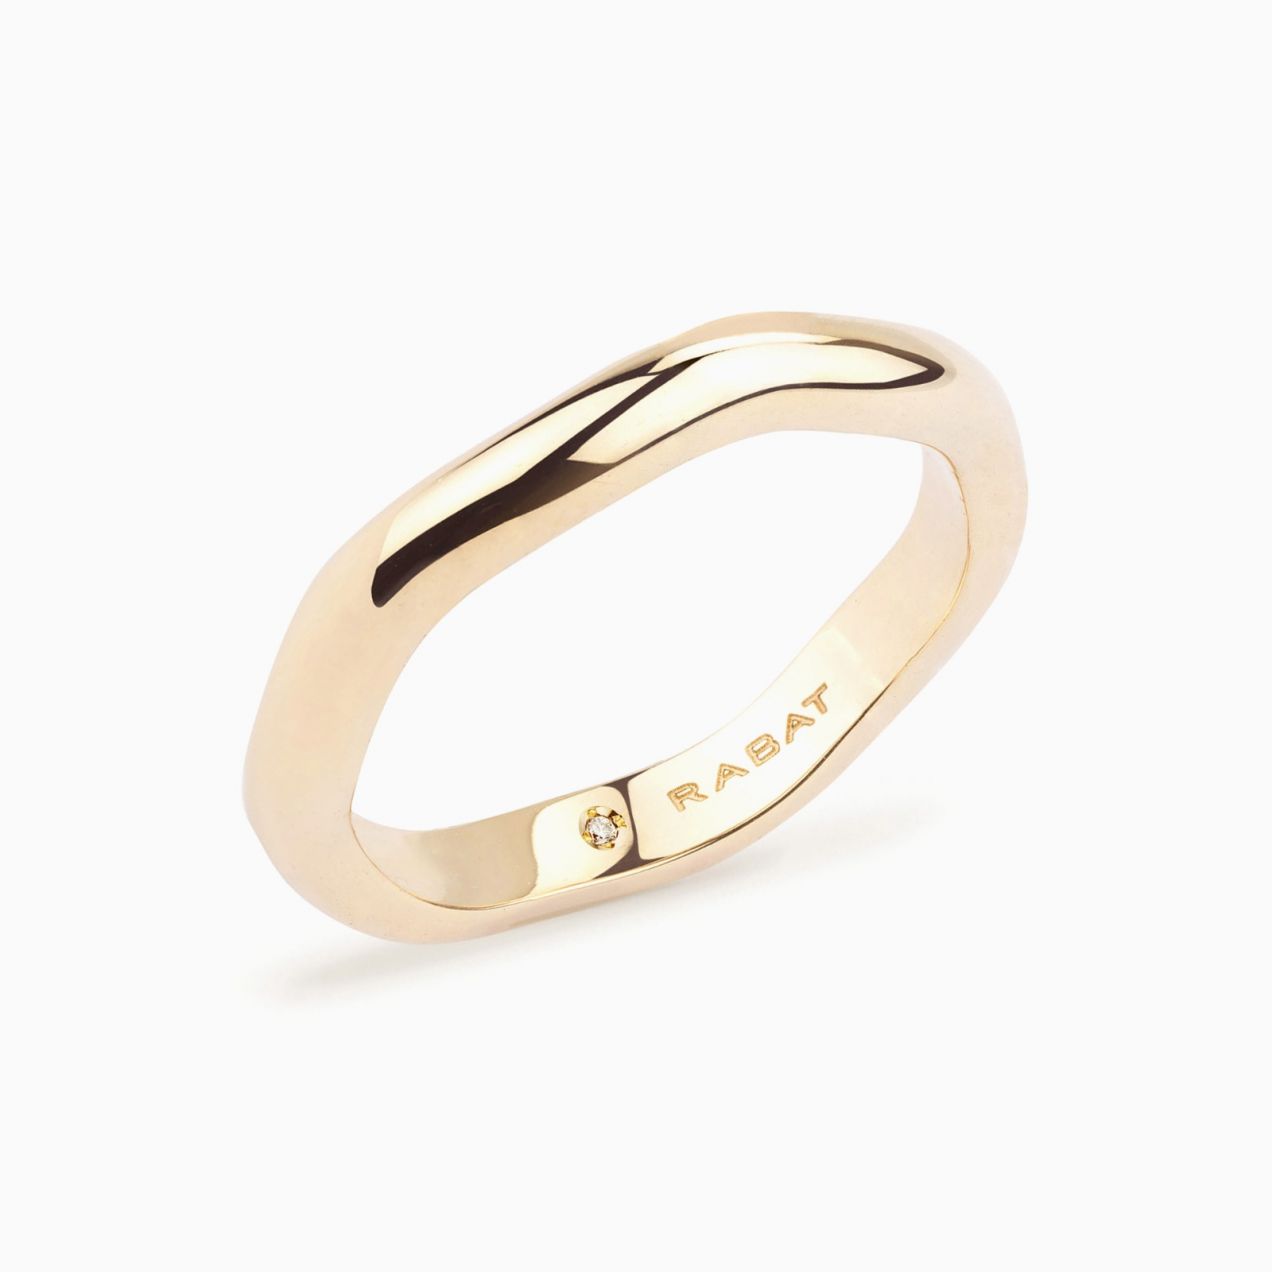 Rose wedding band in gold